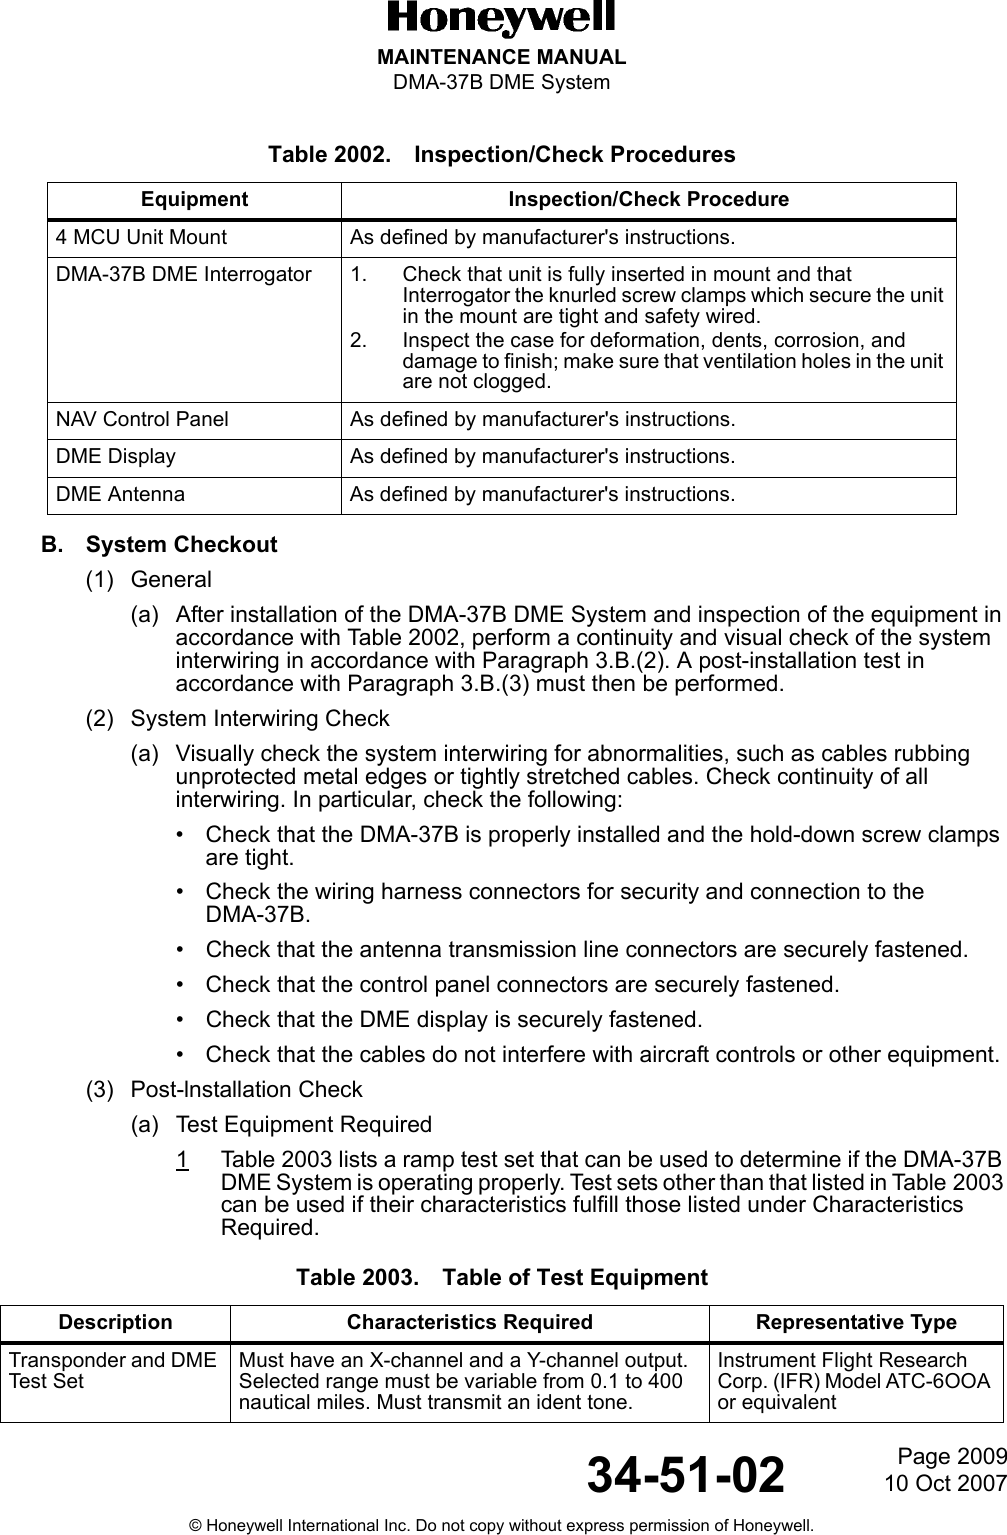 Page 200910 Oct 200734-51-02MAINTENANCE MANUALDMA-37B DME System© Honeywell International Inc. Do not copy without express permission of Honeywell.B. System Checkout(1) General(a) After installation of the DMA-37B DME System and inspection of the equipment in accordance with Table 2002, perform a continuity and visual check of the system interwiring in accordance with Paragraph 3.B.(2). A post-installation test in accordance with Paragraph 3.B.(3) must then be performed.(2) System Interwiring Check(a) Visually check the system interwiring for abnormalities, such as cables rubbing unprotected metal edges or tightly stretched cables. Check continuity of all interwiring. In particular, check the following:• Check that the DMA-37B is properly installed and the hold-down screw clamps are tight.• Check the wiring harness connectors for security and connection to the DMA-37B.• Check that the antenna transmission line connectors are securely fastened.• Check that the control panel connectors are securely fastened.• Check that the DME display is securely fastened.• Check that the cables do not interfere with aircraft controls or other equipment.(3) Post-lnstallation Check(a) Test Equipment Required1Table 2003 lists a ramp test set that can be used to determine if the DMA-37B DME System is operating properly. Test sets other than that listed in Table 2003 can be used if their characteristics fulfill those listed under Characteristics Required.Table 2002. Inspection/Check ProceduresEquipment Inspection/Check Procedure4 MCU Unit Mount As defined by manufacturer&apos;s instructions.DMA-37B DME Interrogator 1. Check that unit is fully inserted in mount and that Interrogator the knurled screw clamps which secure the unit in the mount are tight and safety wired.2. Inspect the case for deformation, dents, corrosion, and damage to finish; make sure that ventilation holes in the unit are not clogged.NAV Control Panel As defined by manufacturer&apos;s instructions.DME Display As defined by manufacturer&apos;s instructions.DME Antenna As defined by manufacturer&apos;s instructions.Table 2003. Table of Test EquipmentDescription Characteristics Required Representative TypeTransponder and DME Test SetMust have an X-channel and a Y-channel output. Selected range must be variable from 0.1 to 400 nautical miles. Must transmit an ident tone.Instrument Flight Research Corp. (IFR) Model ATC-6OOA or equivalent